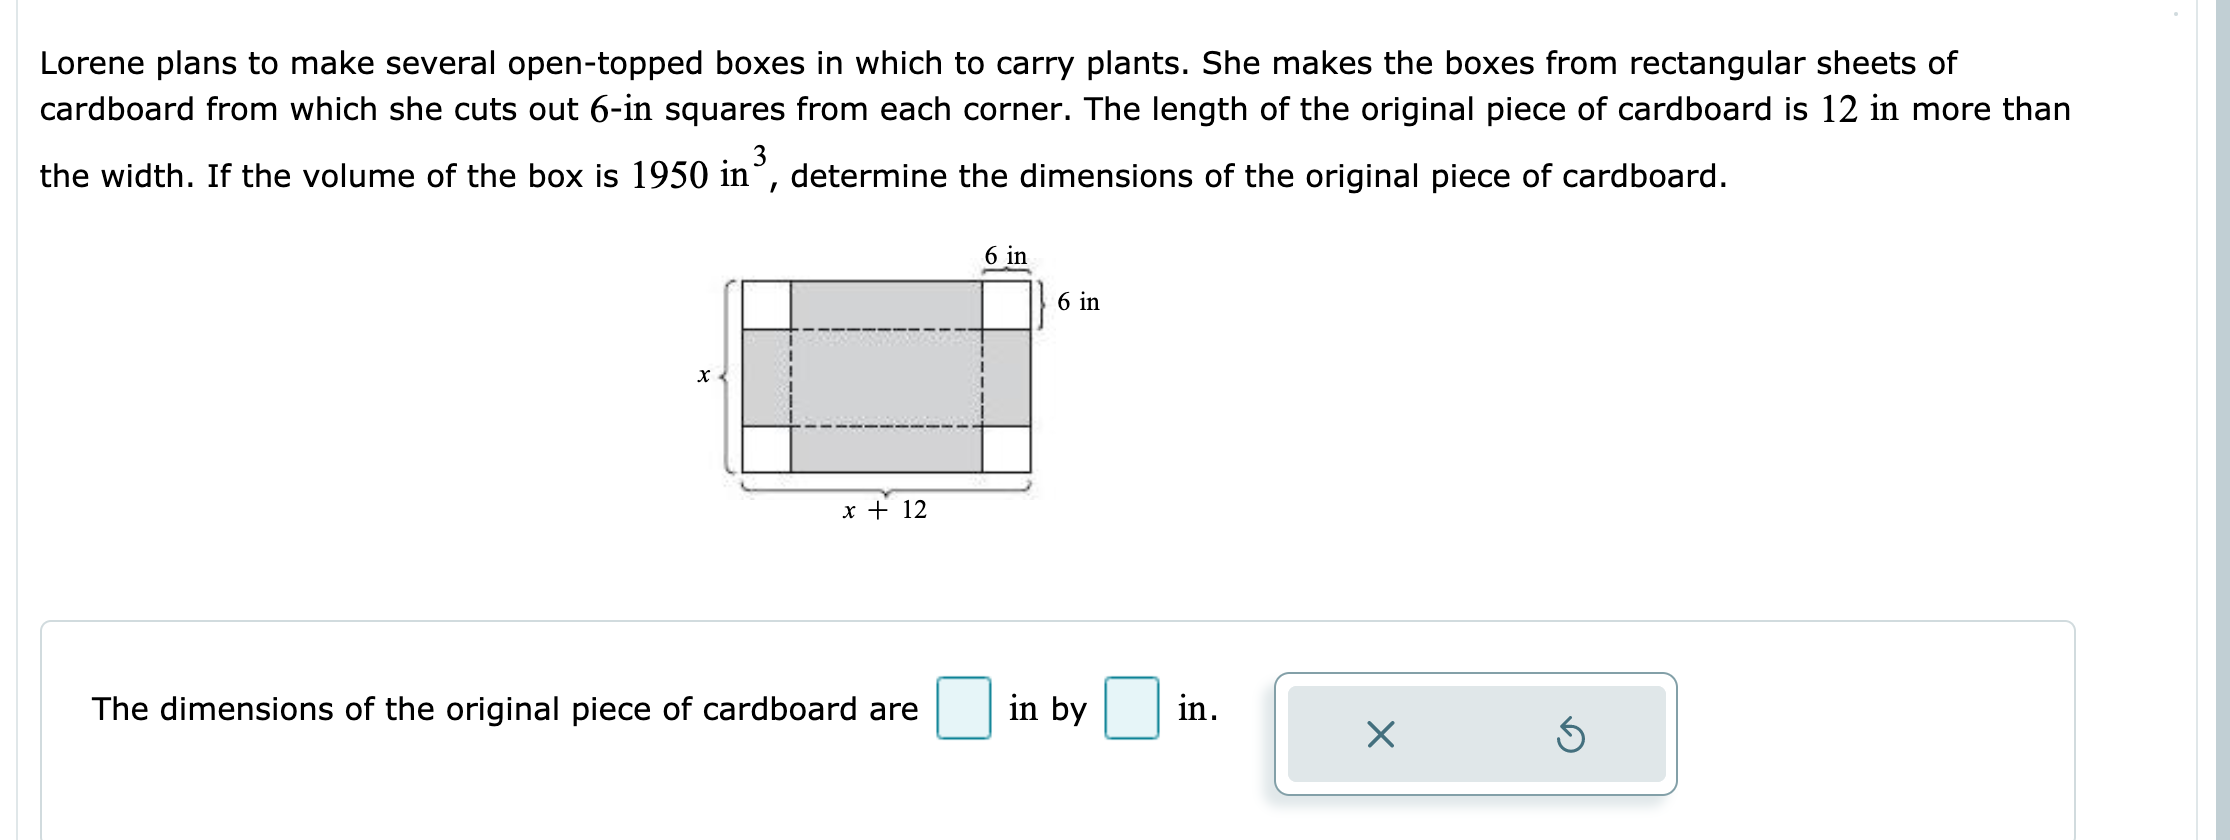 Lorene plans to make several open-topped boxes in which to carry plants. She makes the boxes from rectangular sheets of
cardboard from which she cuts out 6-in squares from each corner. The length of the original piece of cardboard is 12 in more than
the width. If the volume of the box is 1950 in", determine the dimensions of the original piece of cardboard.
6 in
6 in
х<
x + 12
in
in by
The dimensions of the original piece of cardboard are
X
